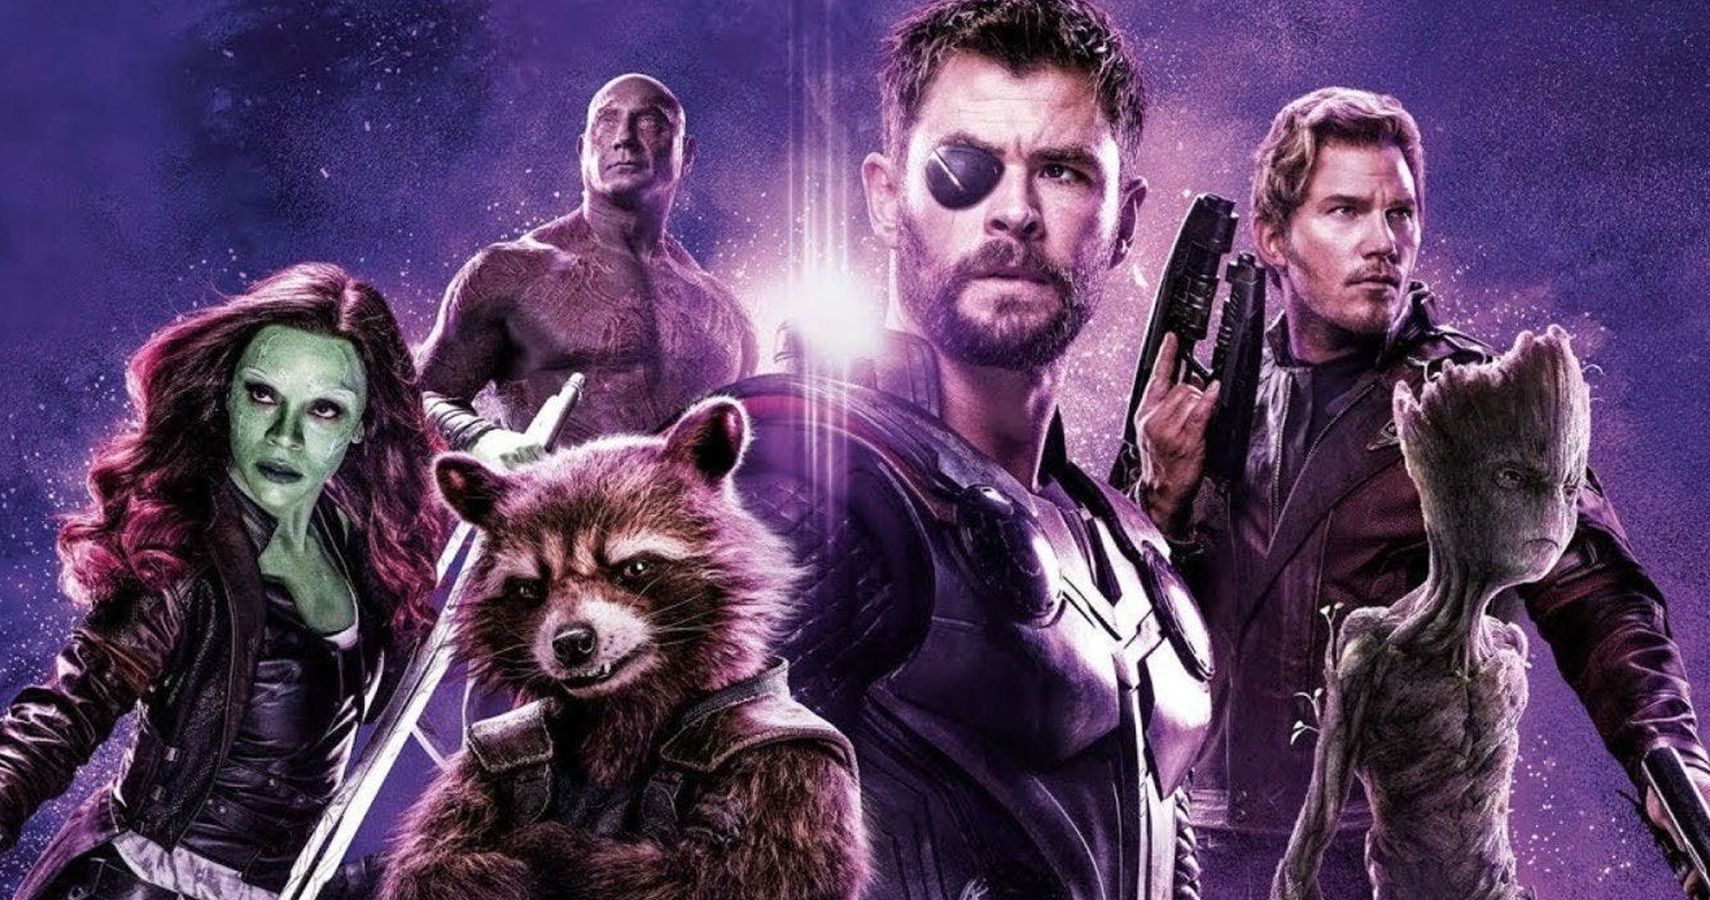 Promo art featuring Thor with the Guardians of the Galaxy